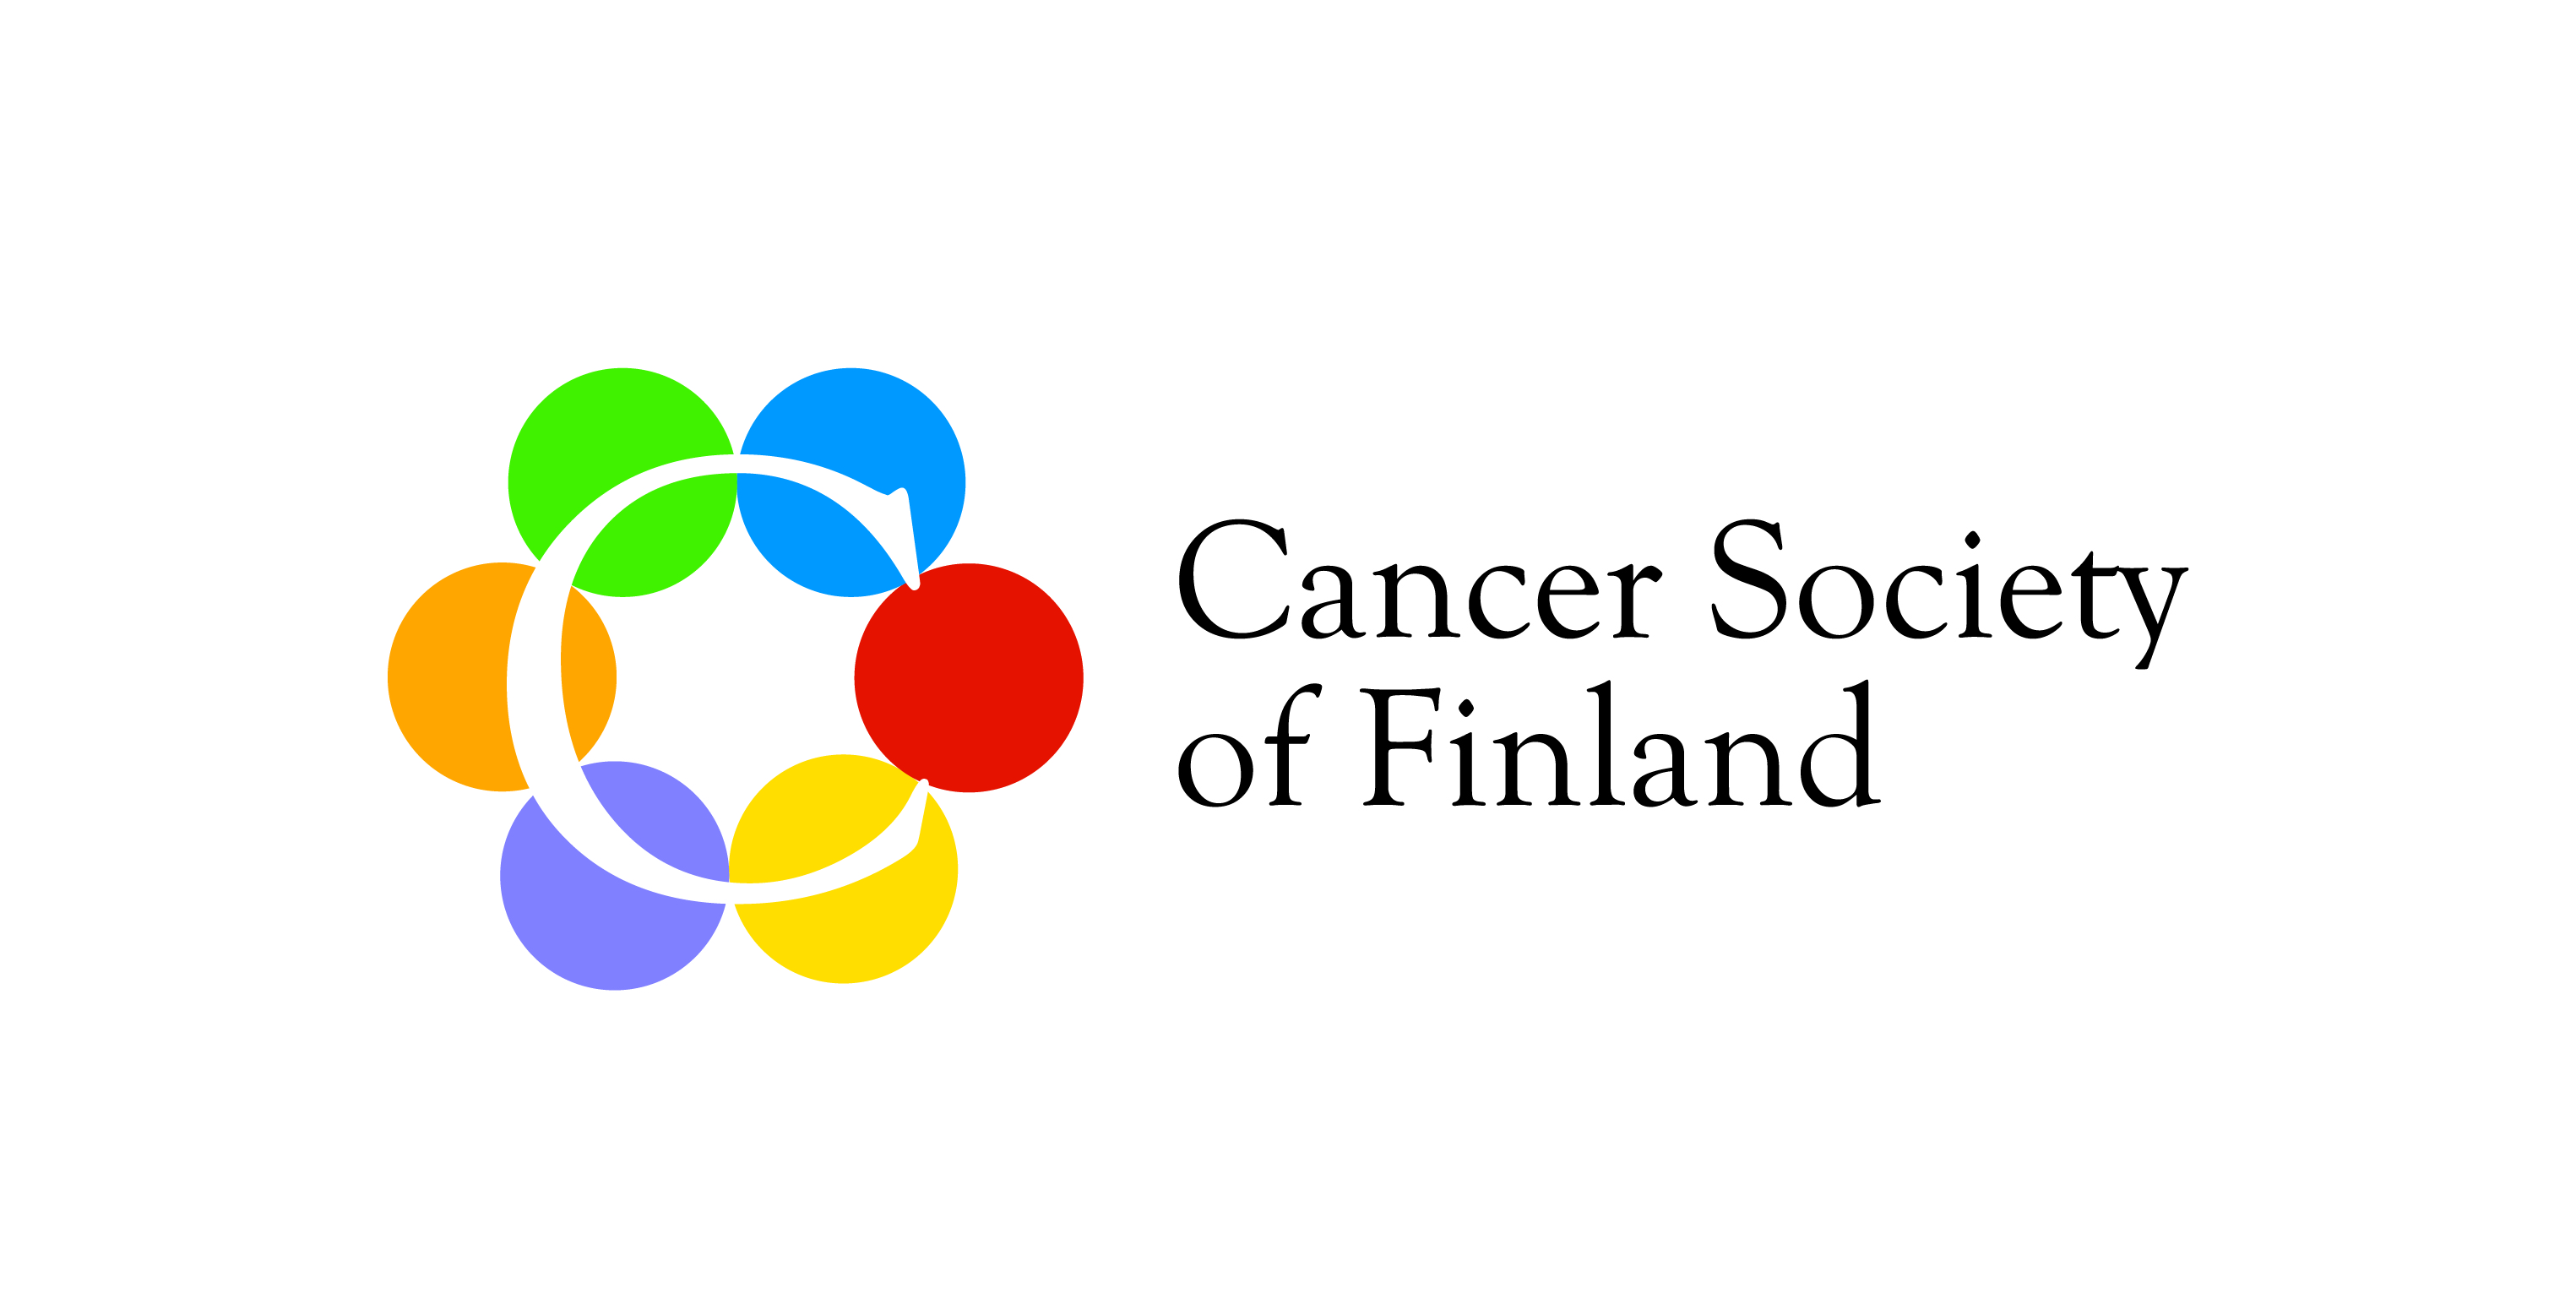 Cancer Society of Finland